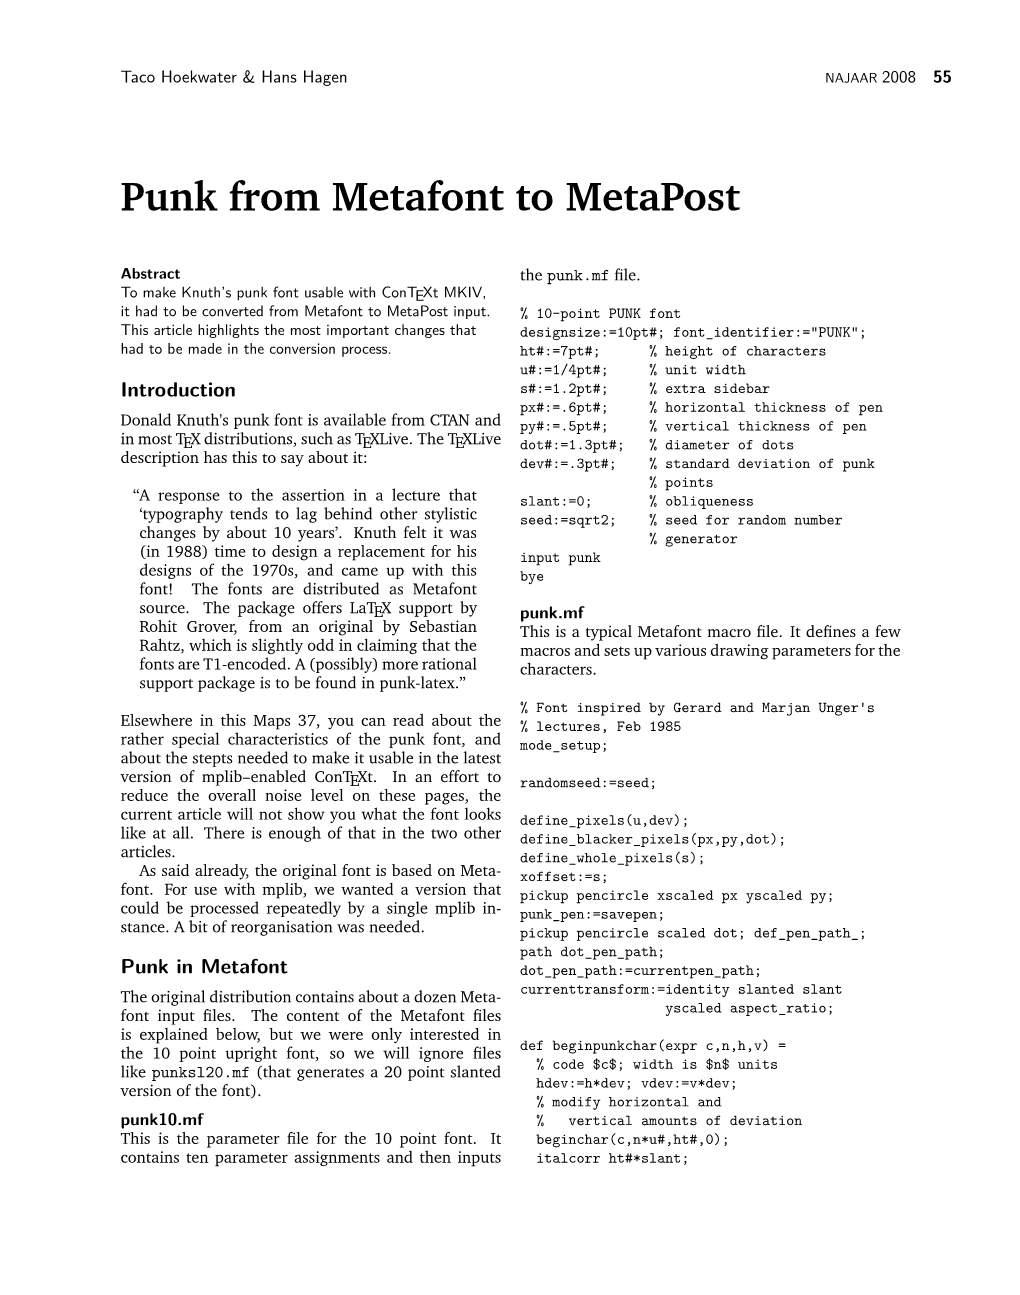 Punk from Metafont to Metapost